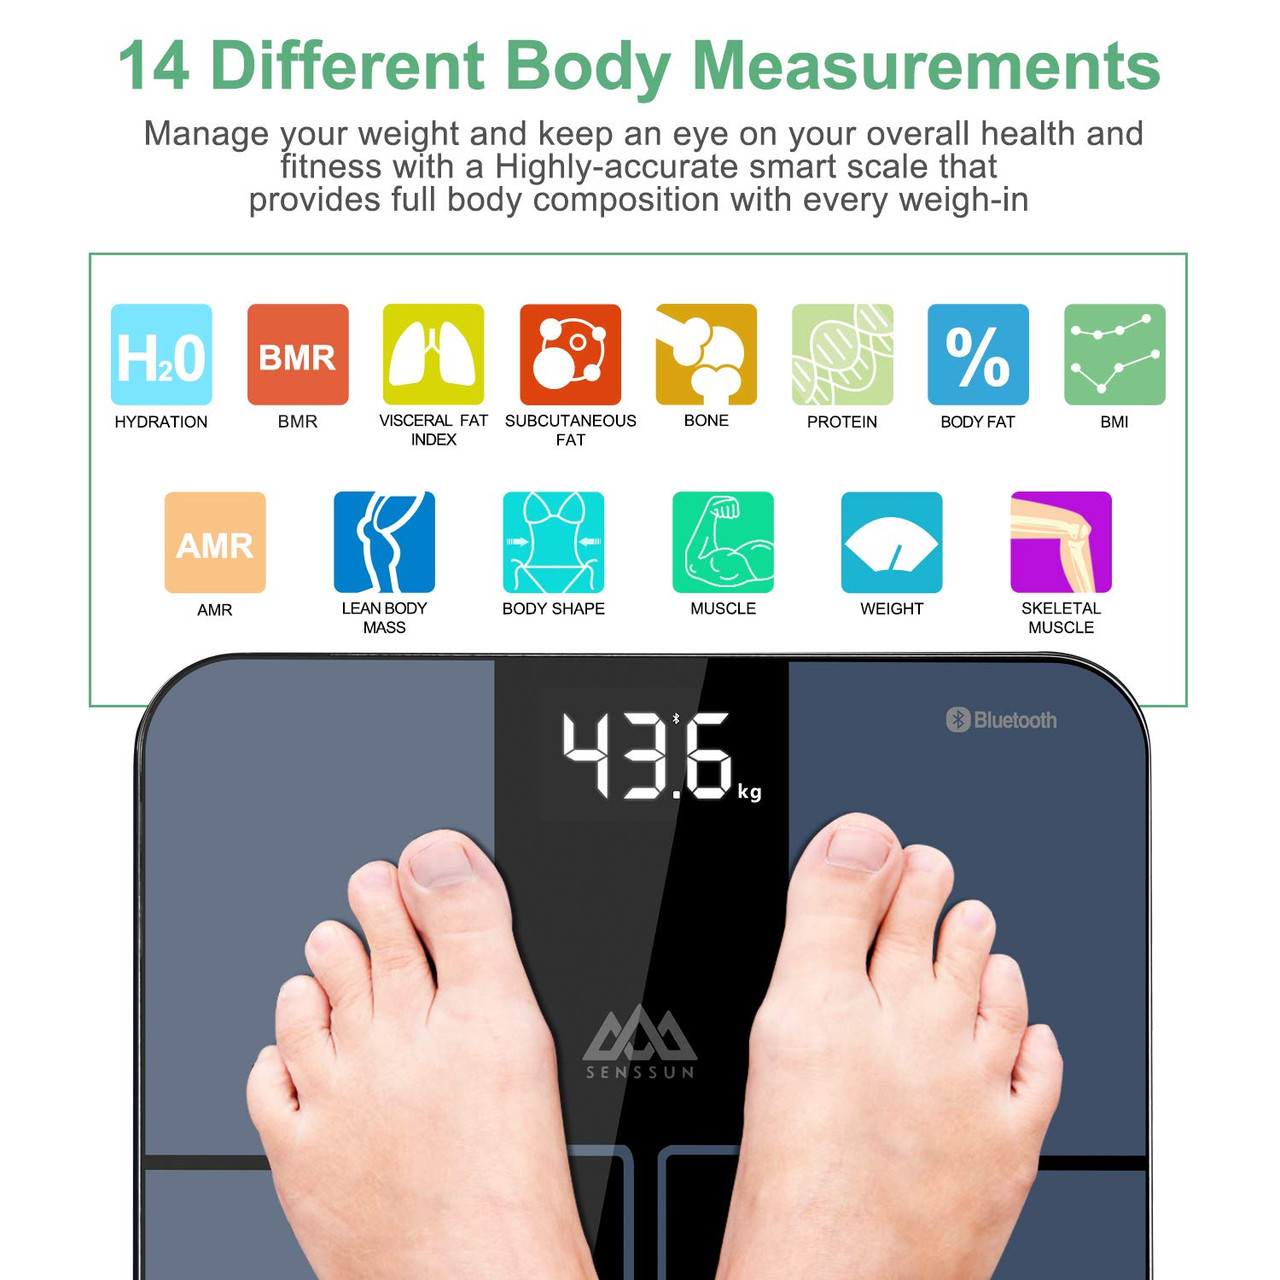 Innotech Smart Body Fat Scale Bluetooth Digital Scales for Weight and Body  Composition BMI Analyzer with Free APP (Please Download The Latest